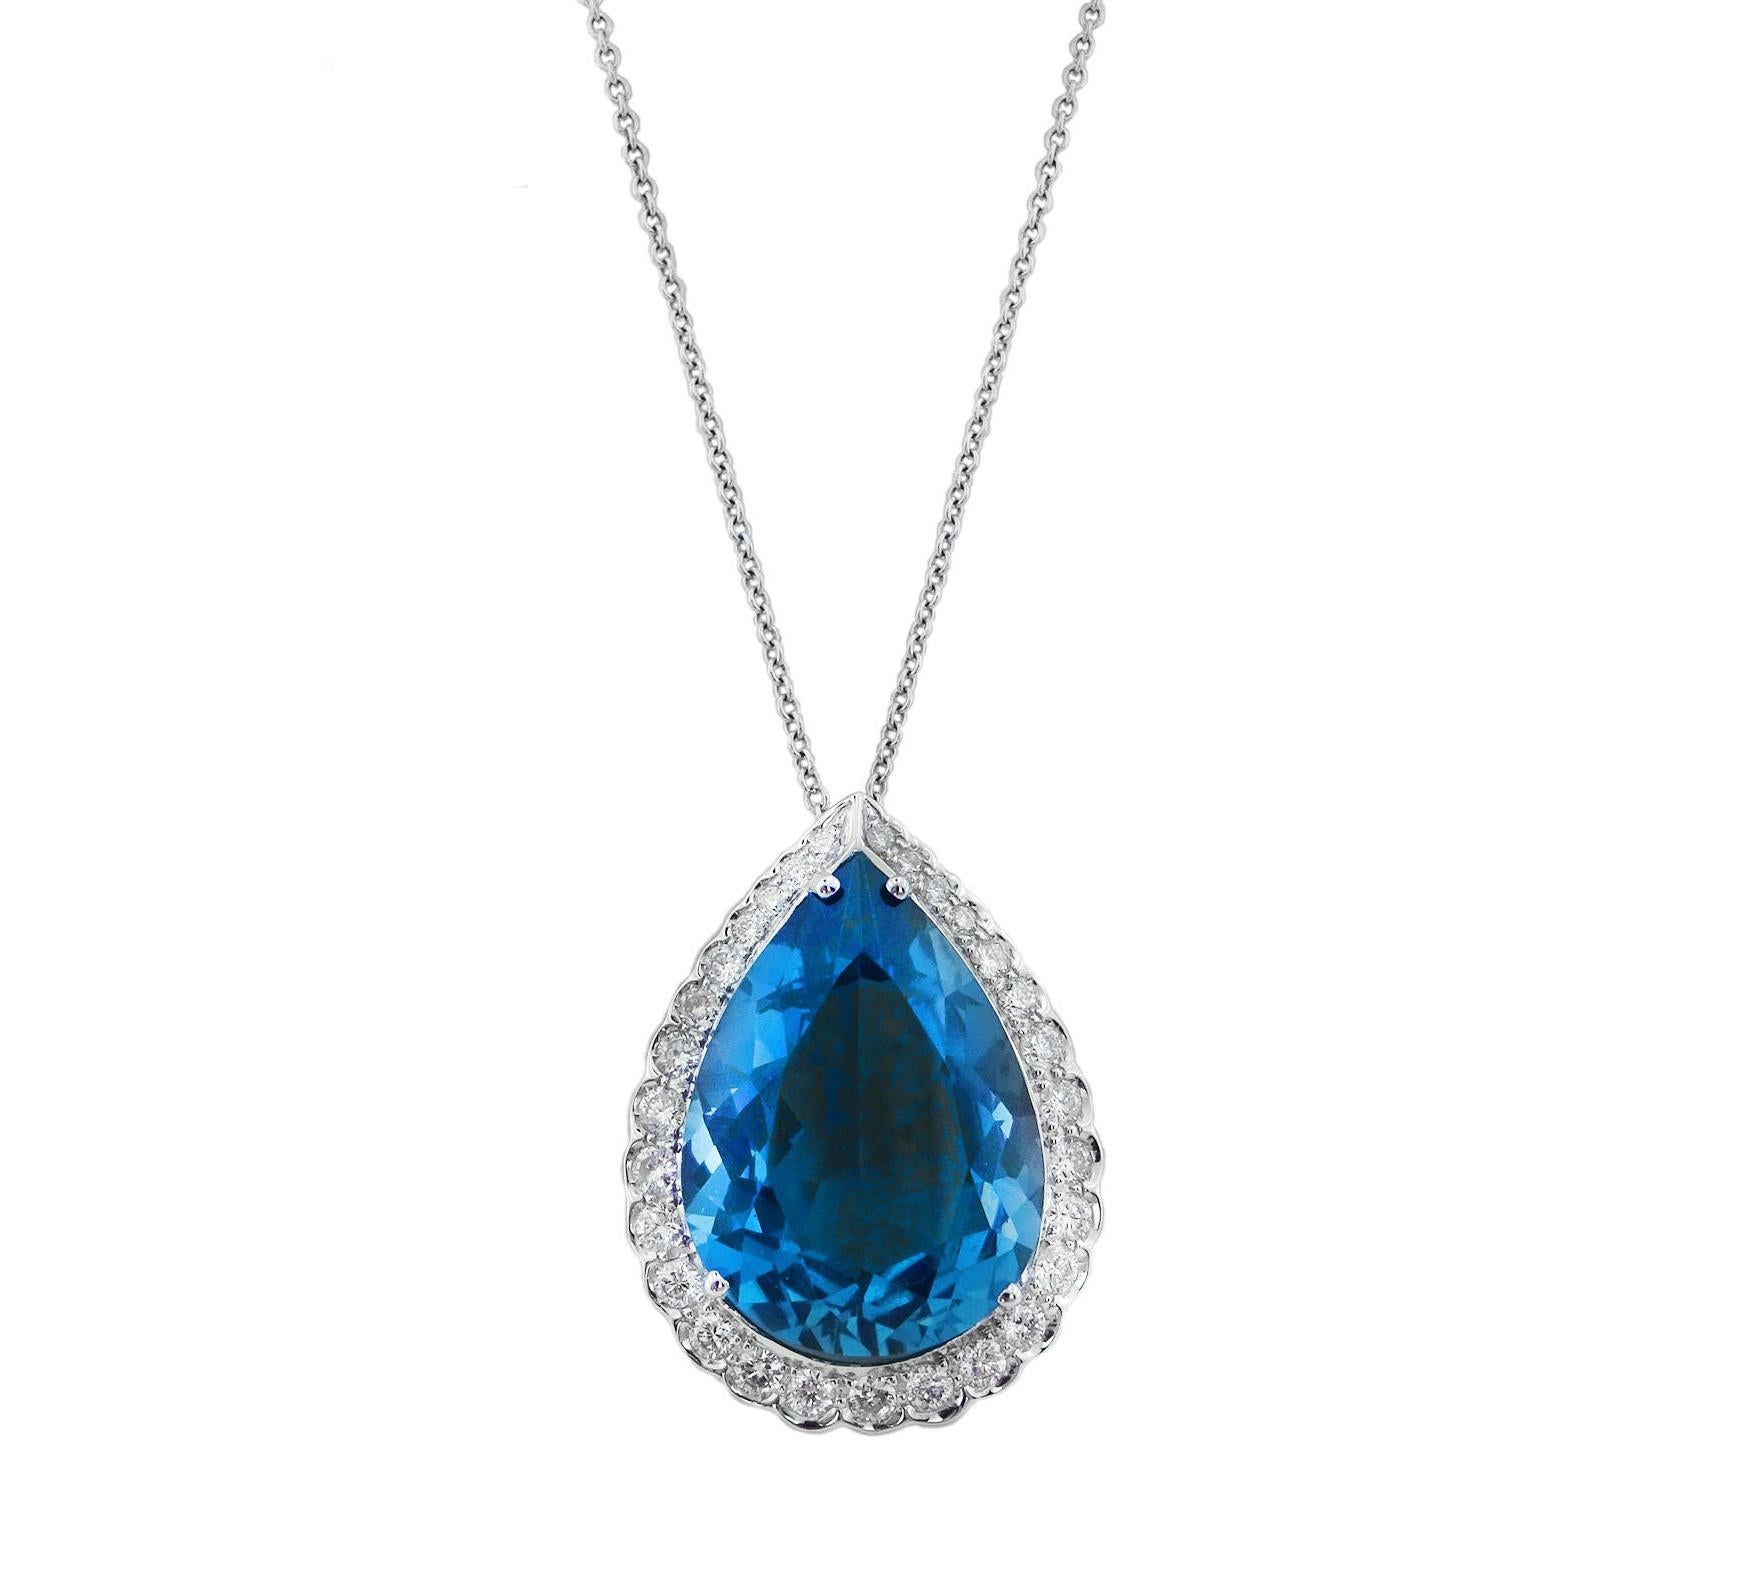 White Gold Pear Cut Blue Topaz Necklace with Diamonds, 11.64 Carat In Excellent Condition For Sale In Knightsbridge, GB